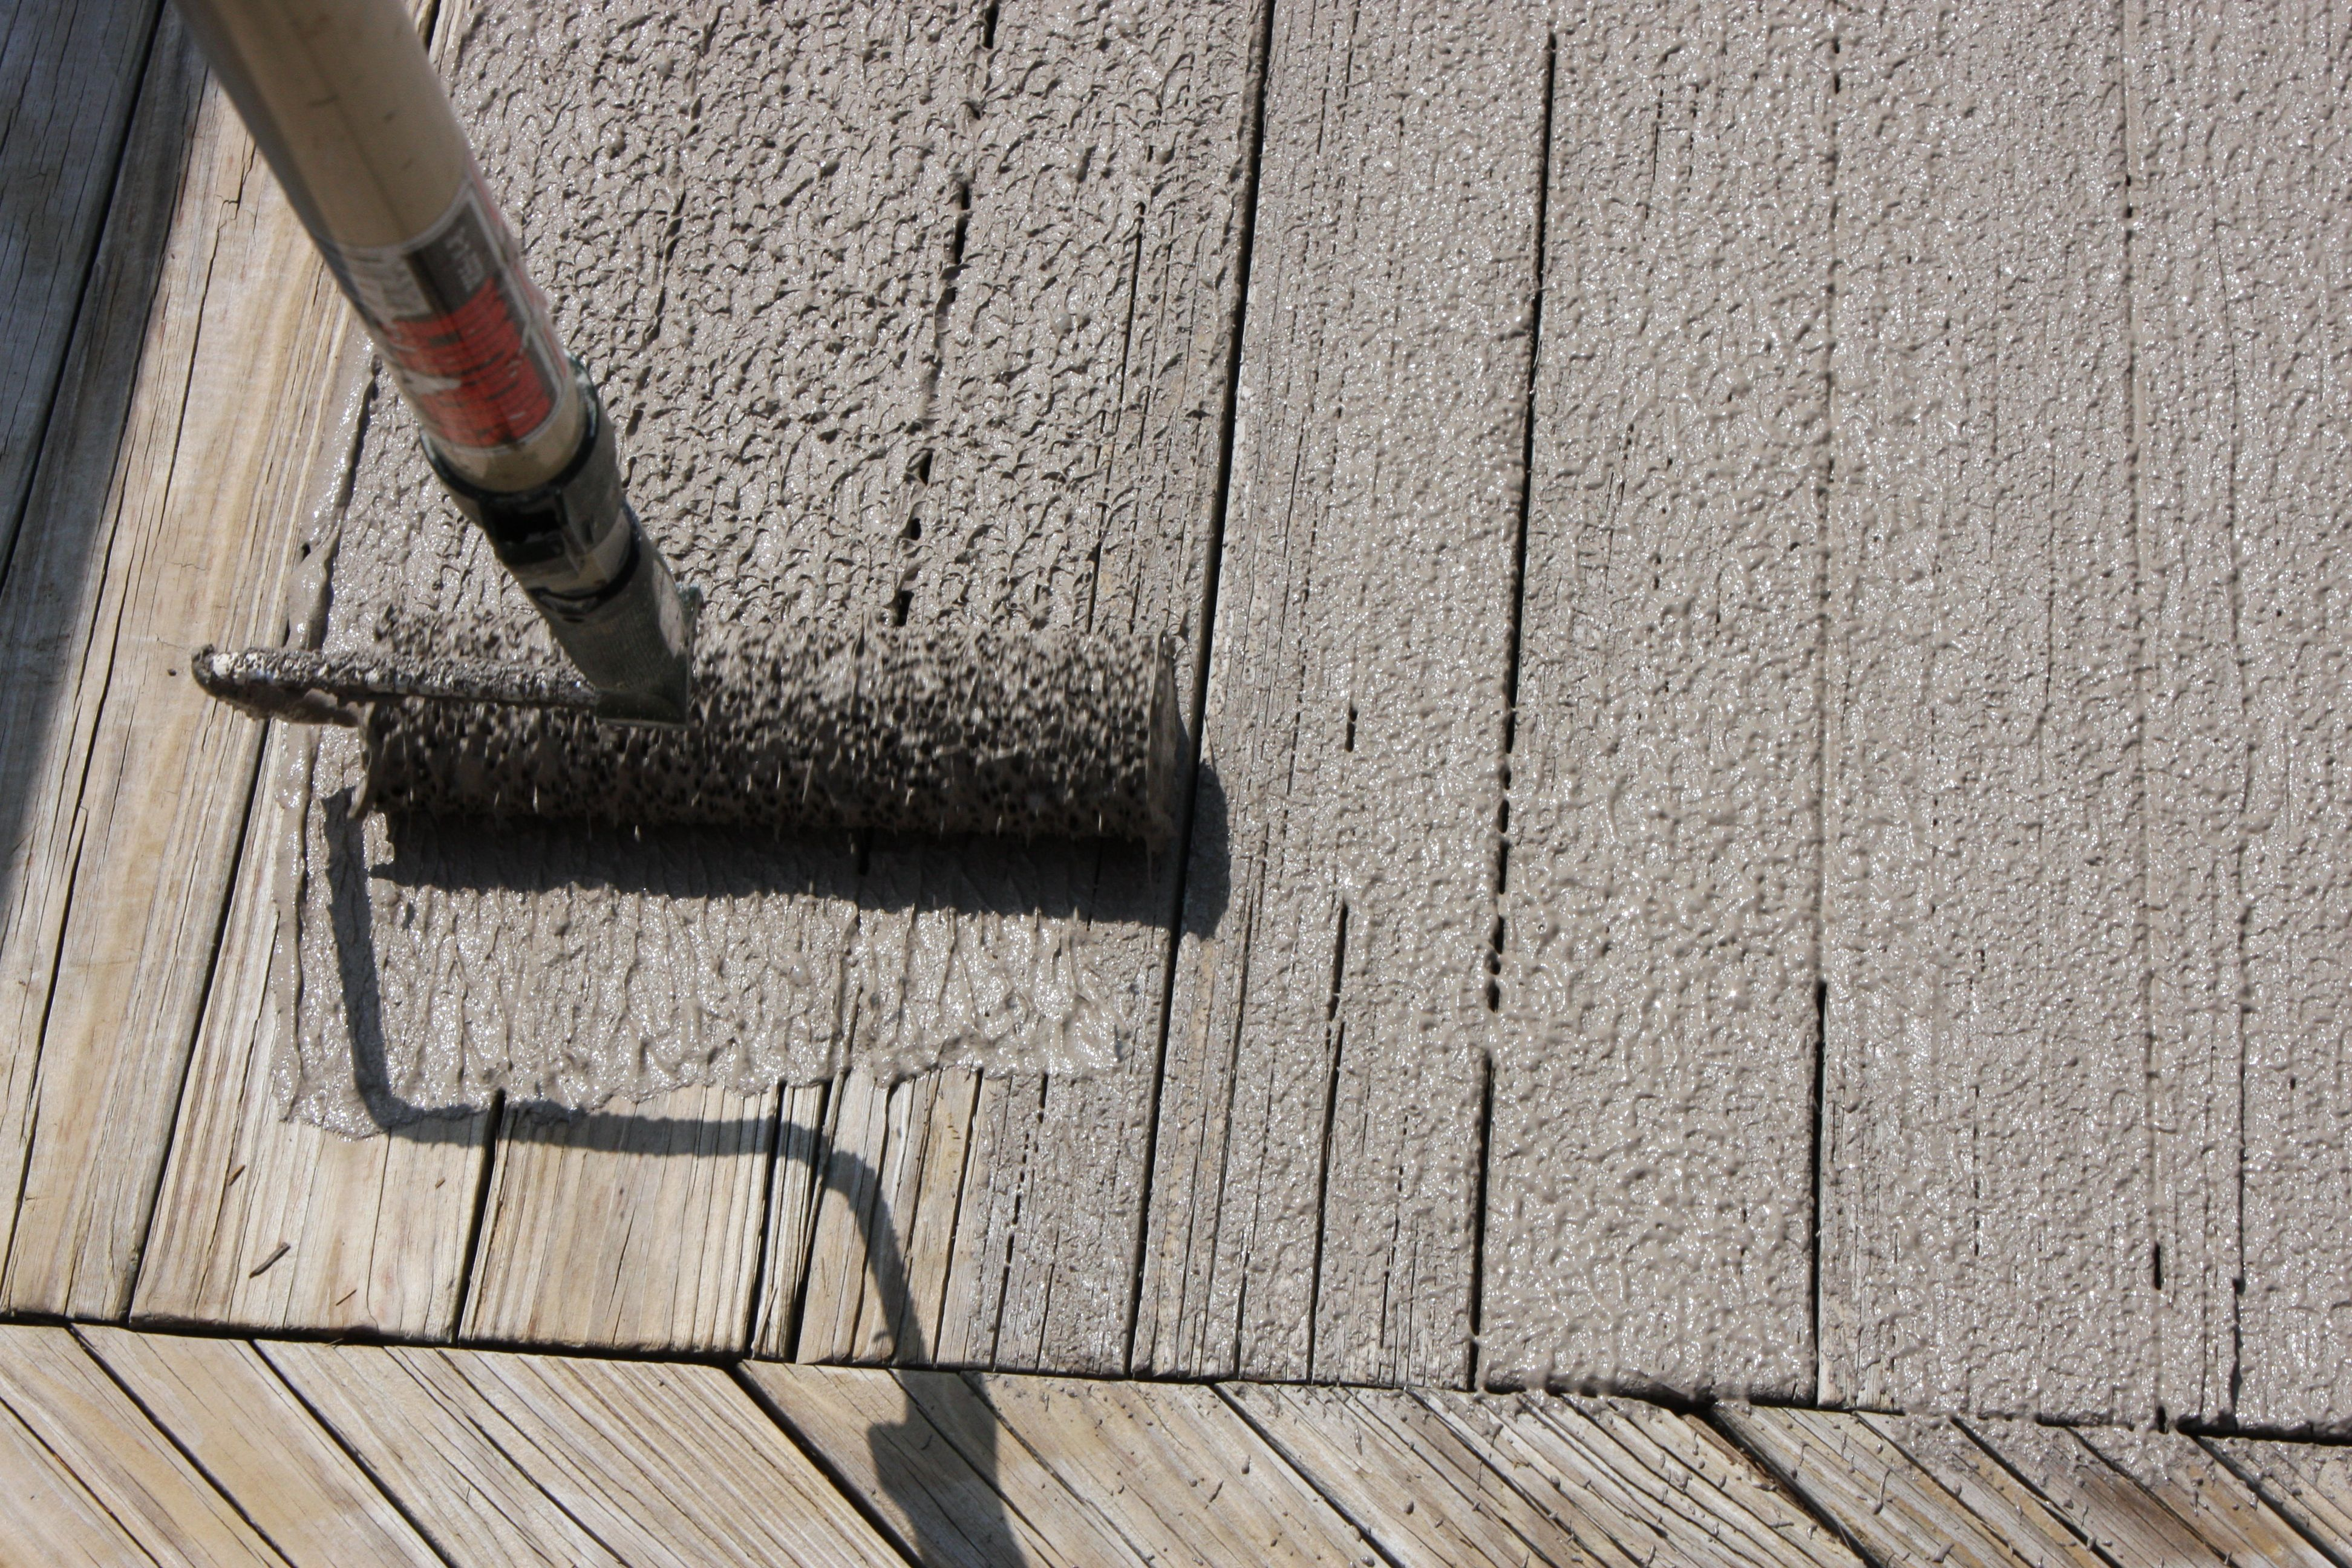 Armorrenew Wood Concrete Resurfacer In 2019 Deck pertaining to dimensions 3888 X 2592